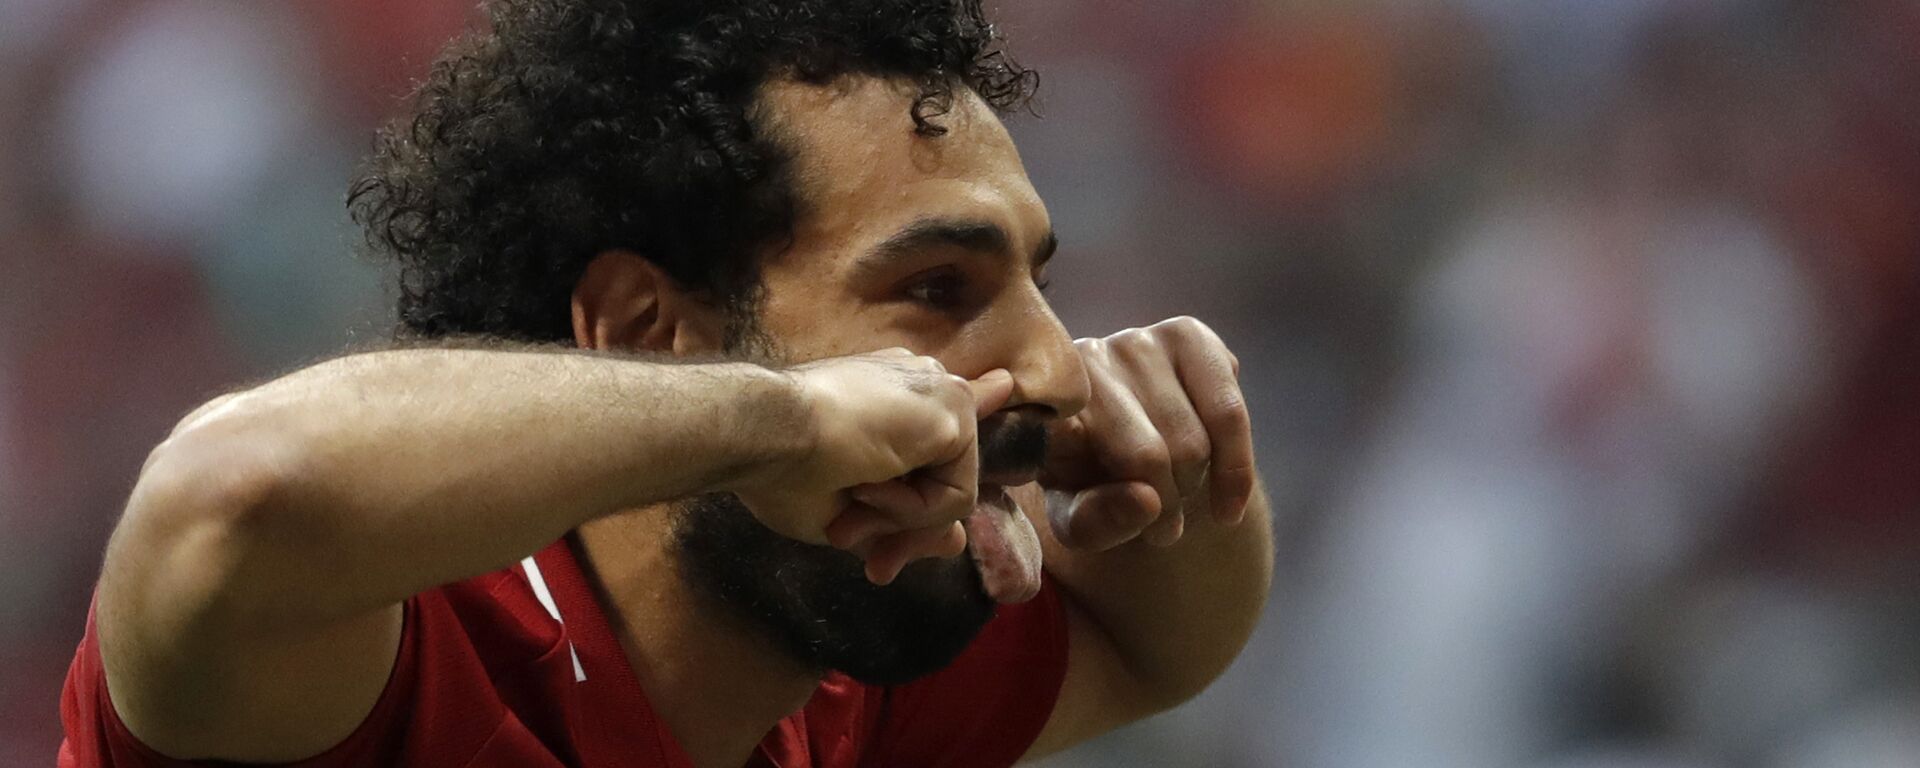 Liverpool's Mohamed Salah celebrates after scoring his side's opening goal during the Champions League final soccer match between Tottenham Hotspur and Liverpool at the Wanda Metropolitano Stadium in Madrid, Saturday, June 1, 2019. - Sputnik International, 1920, 20.05.2021